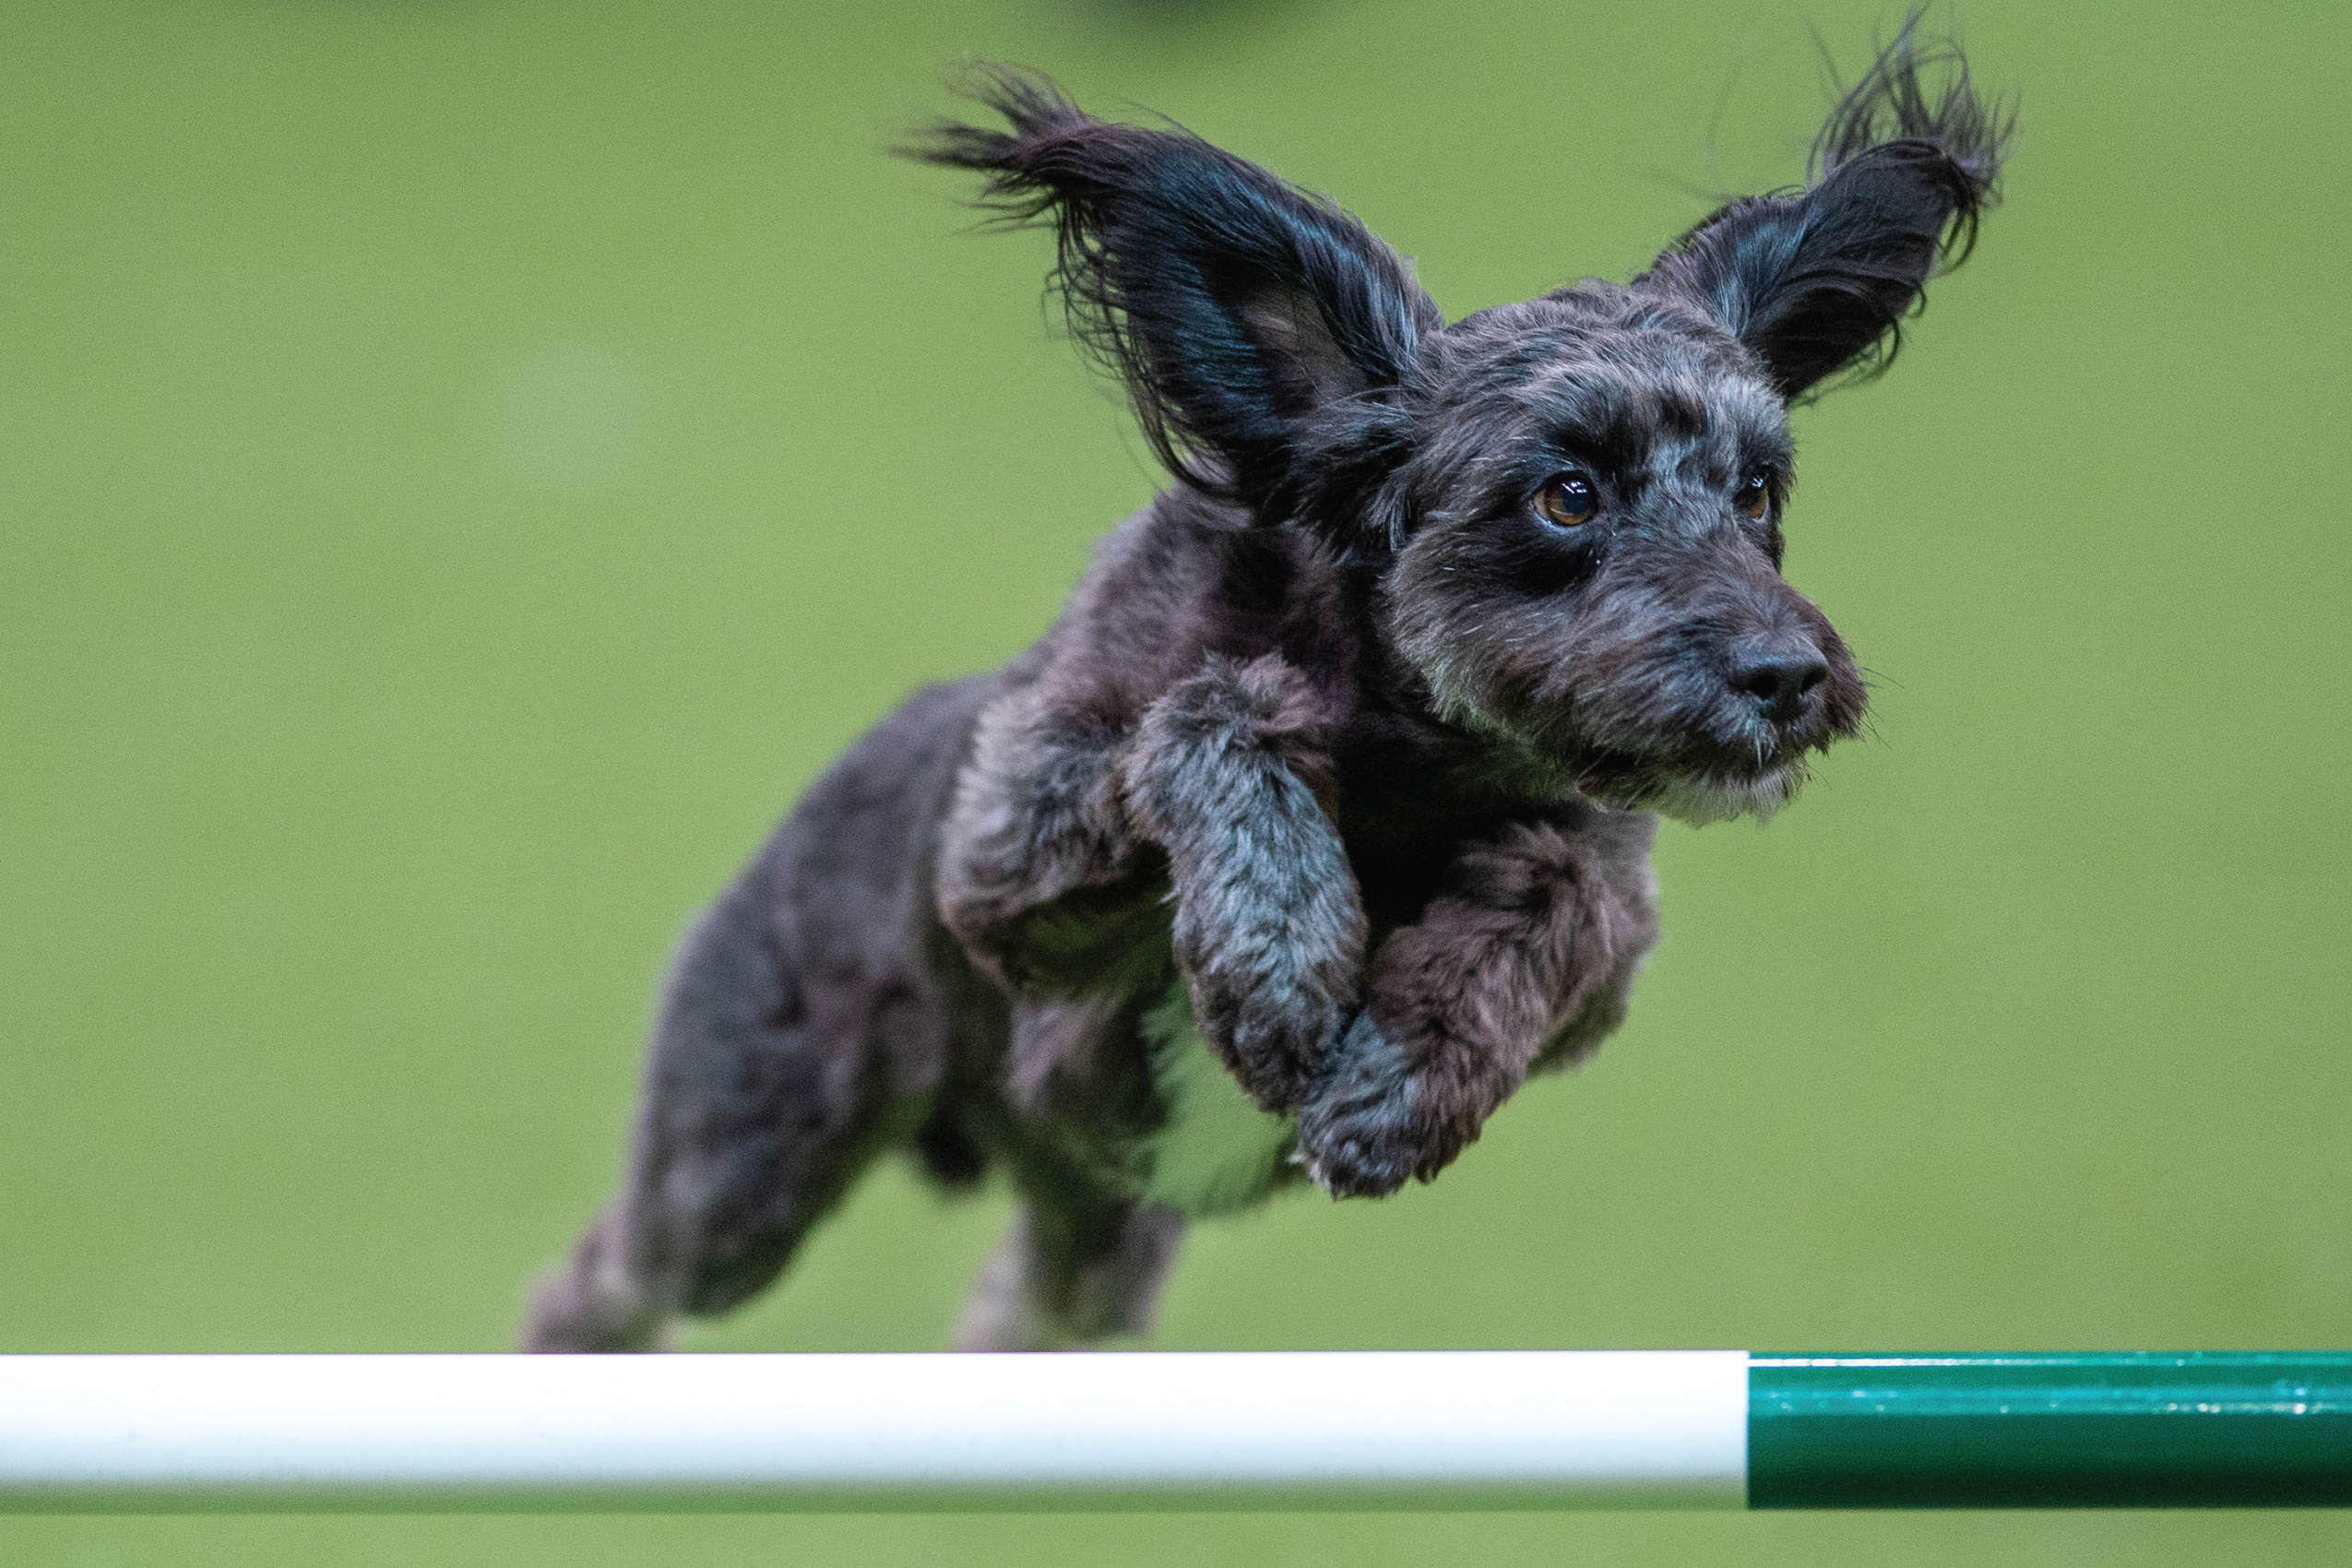 A newcomer’s guide to Crufts